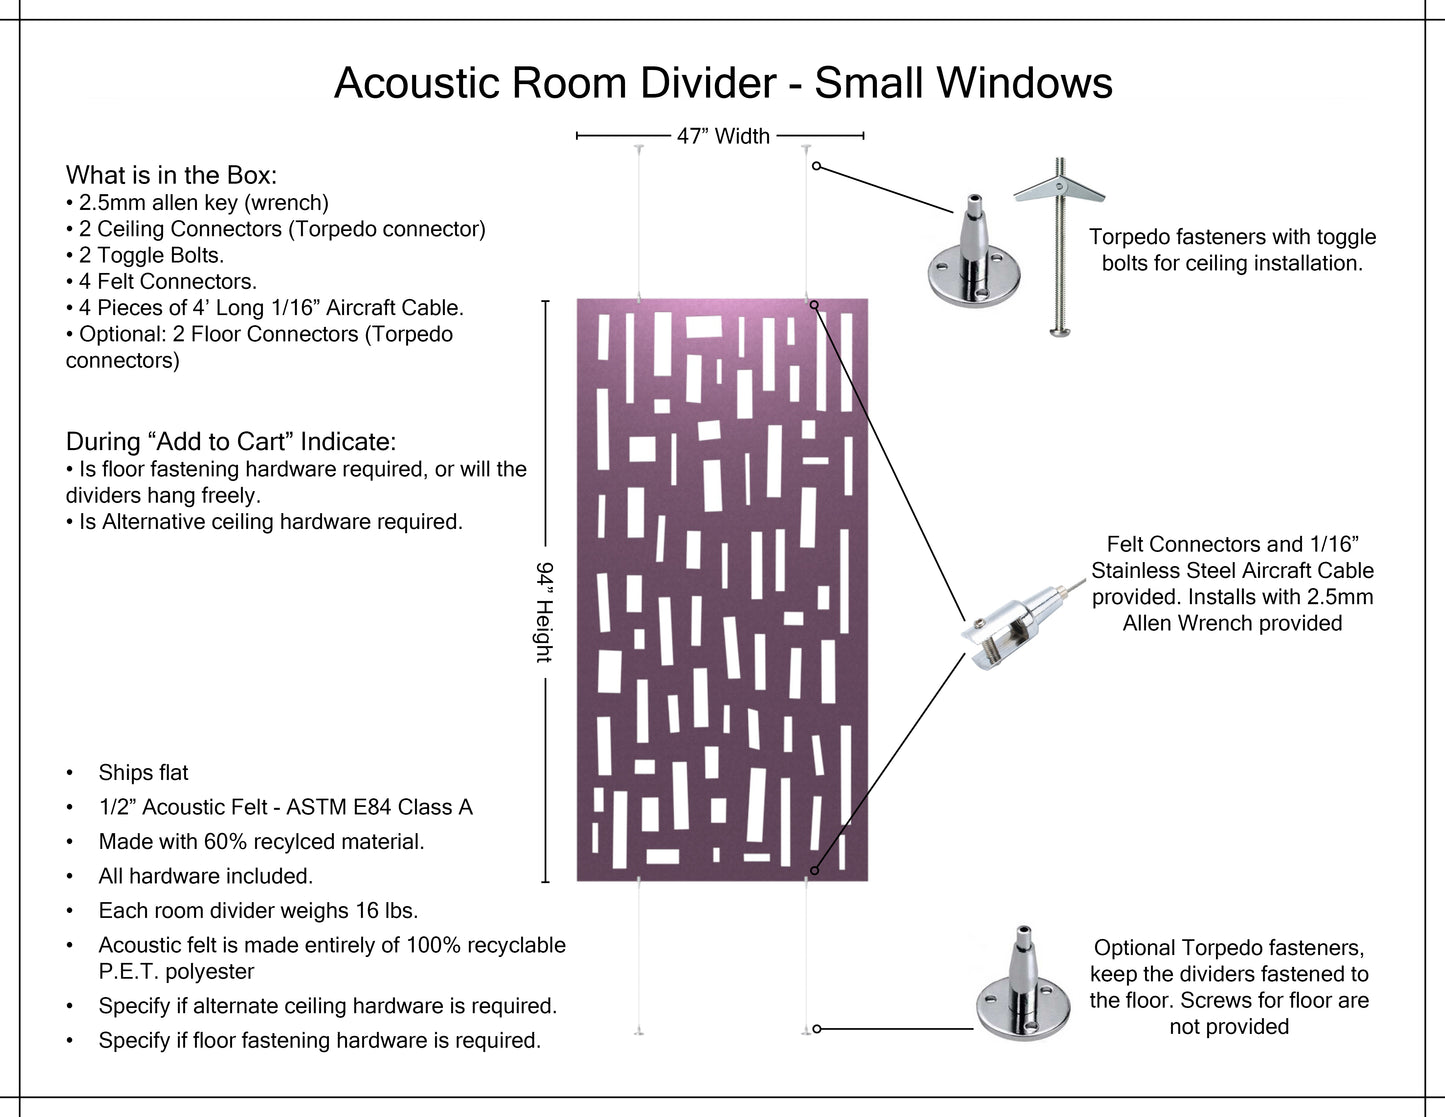 4x8 Acoustic Room Divider - Small Windows